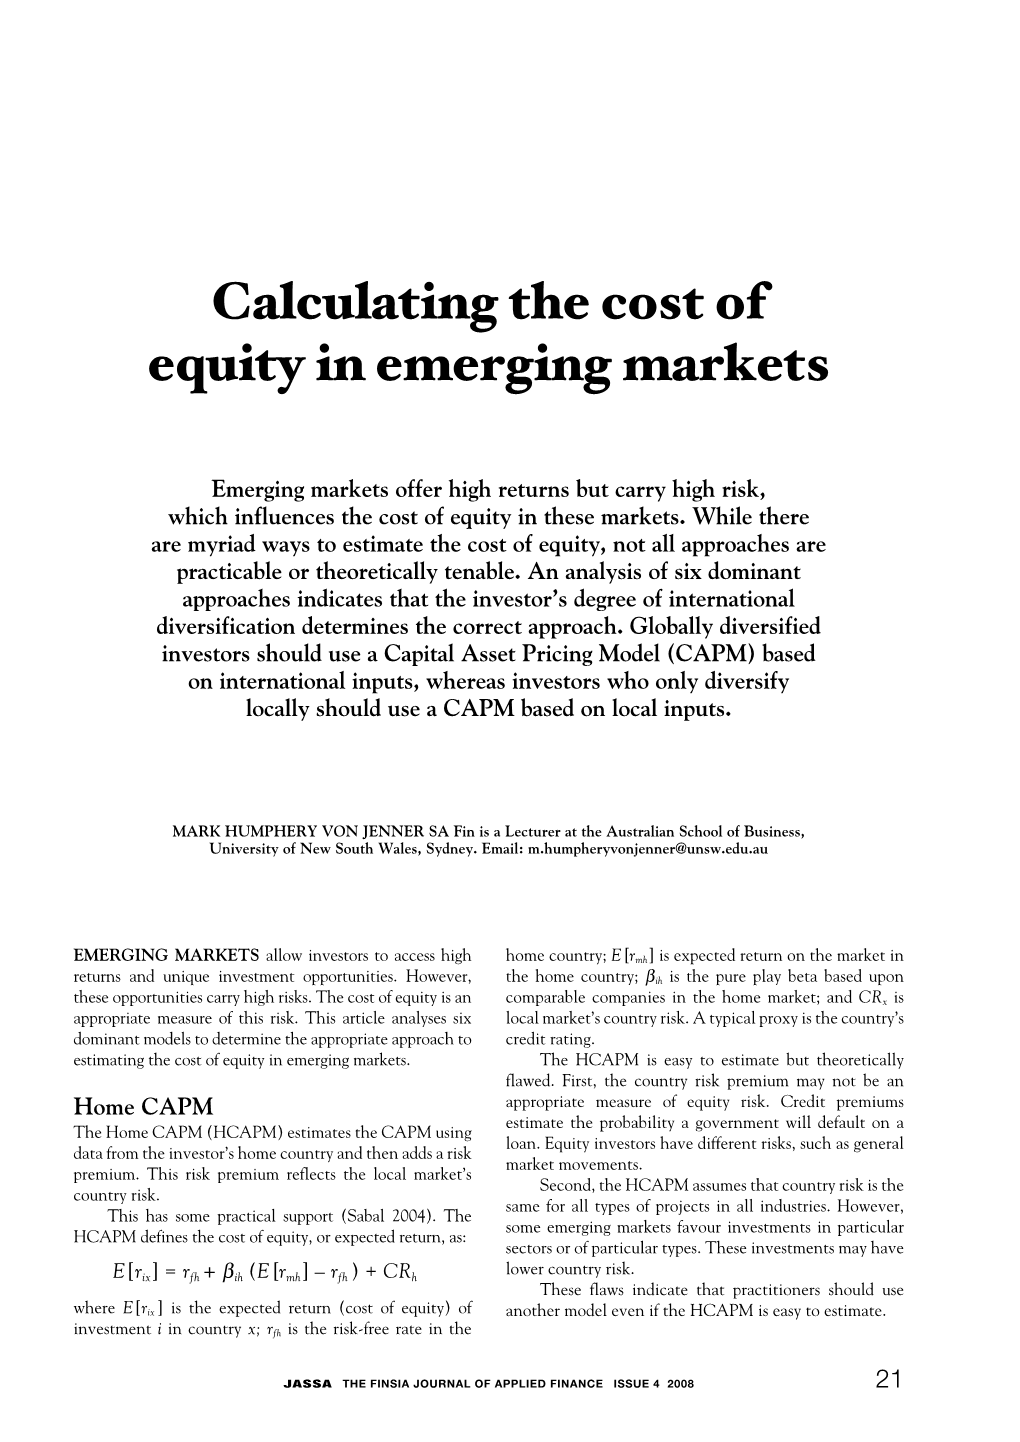 Calculating the Cost of Equity in Emerging Markets